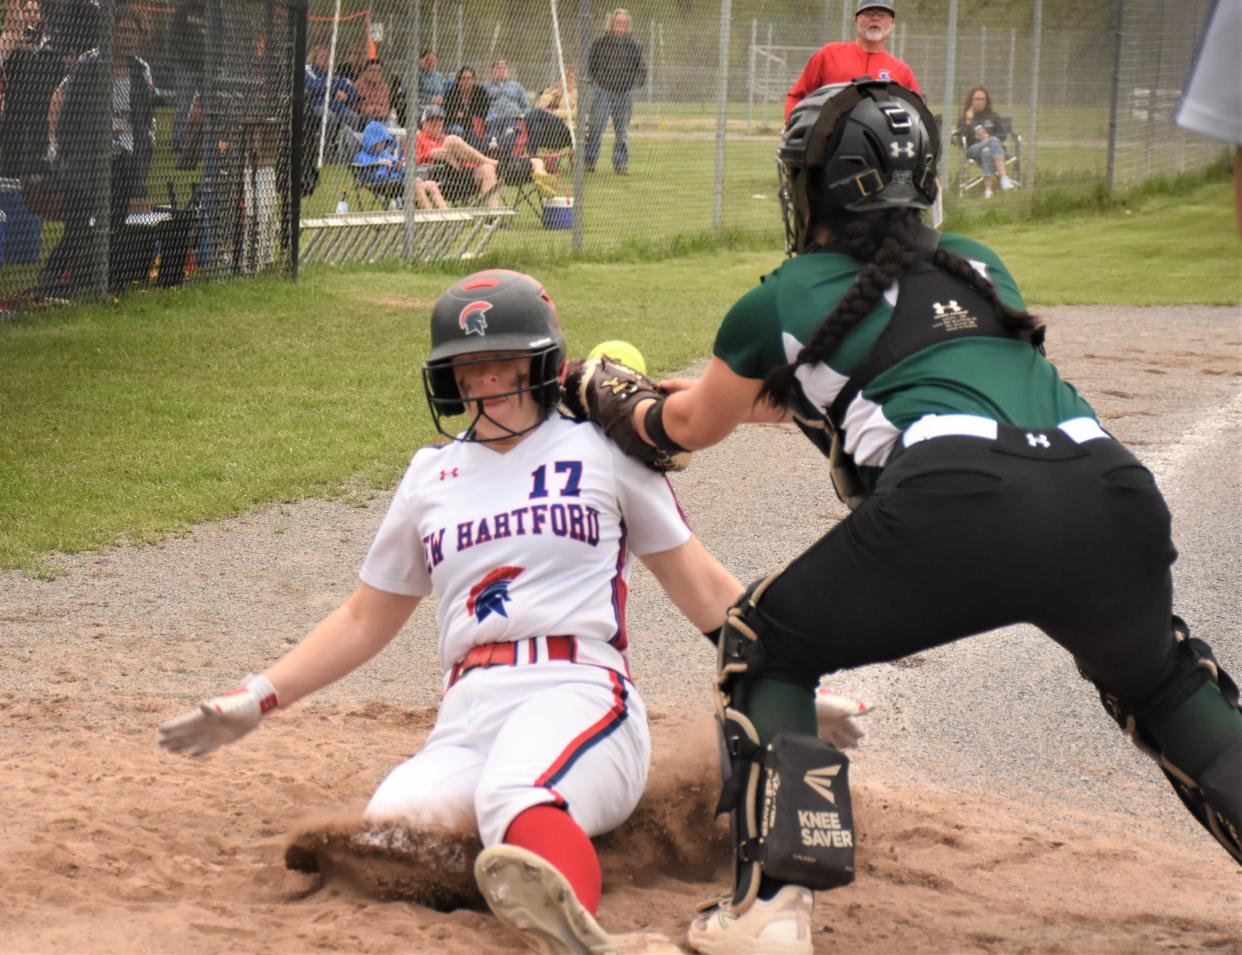 New Hartford Spartan Taylor Scranton (17) slides home safely Saturday as the throw reaches the plate at Mudville during an Officer Joe Corr Tournament game against Buffalo's Nichols School.